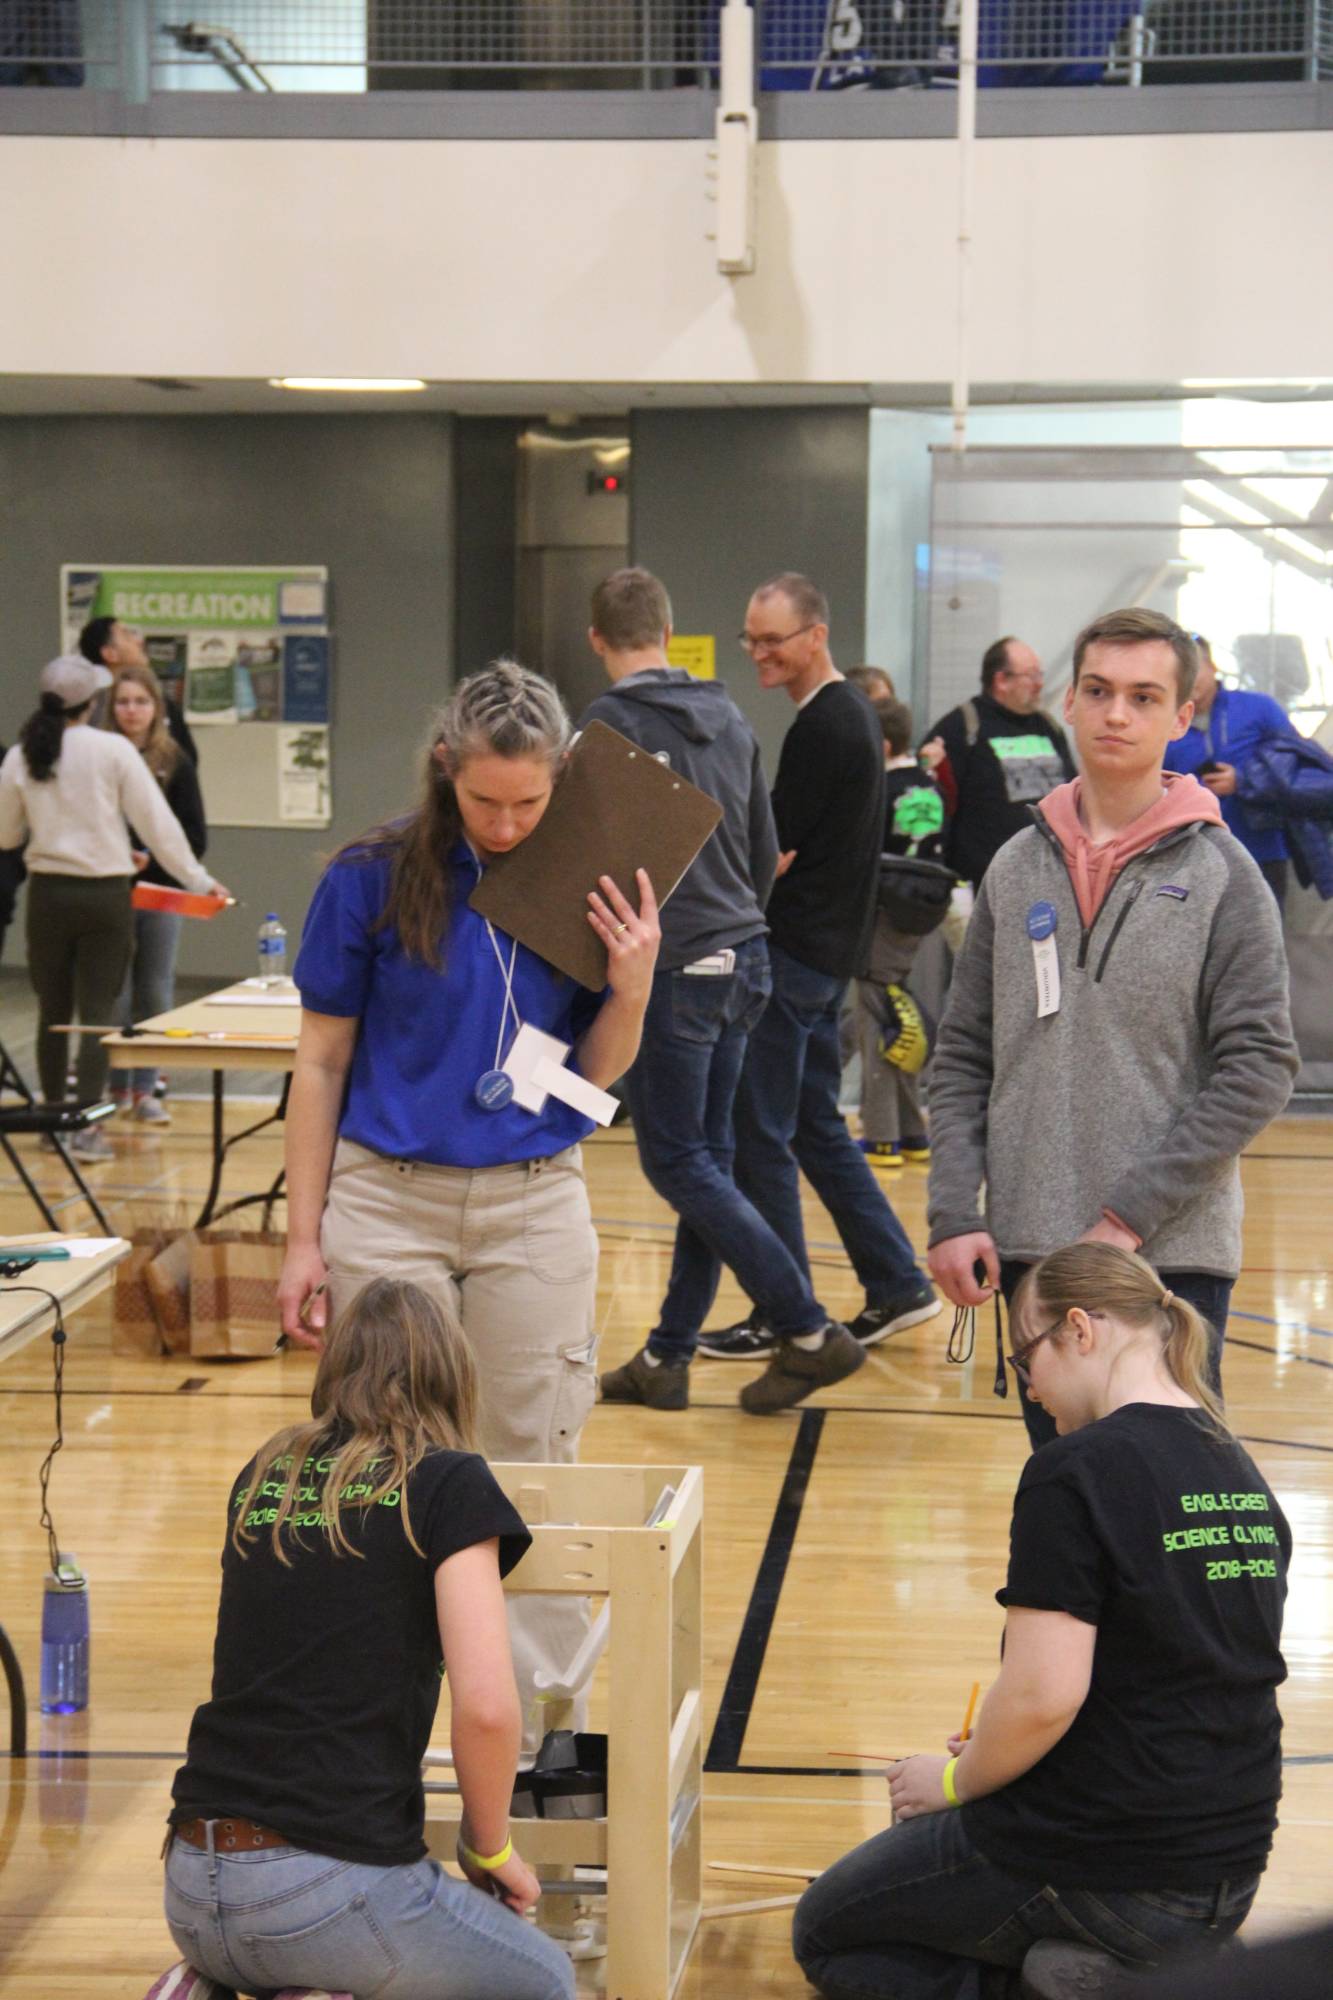 MSO Students being scored on a build event